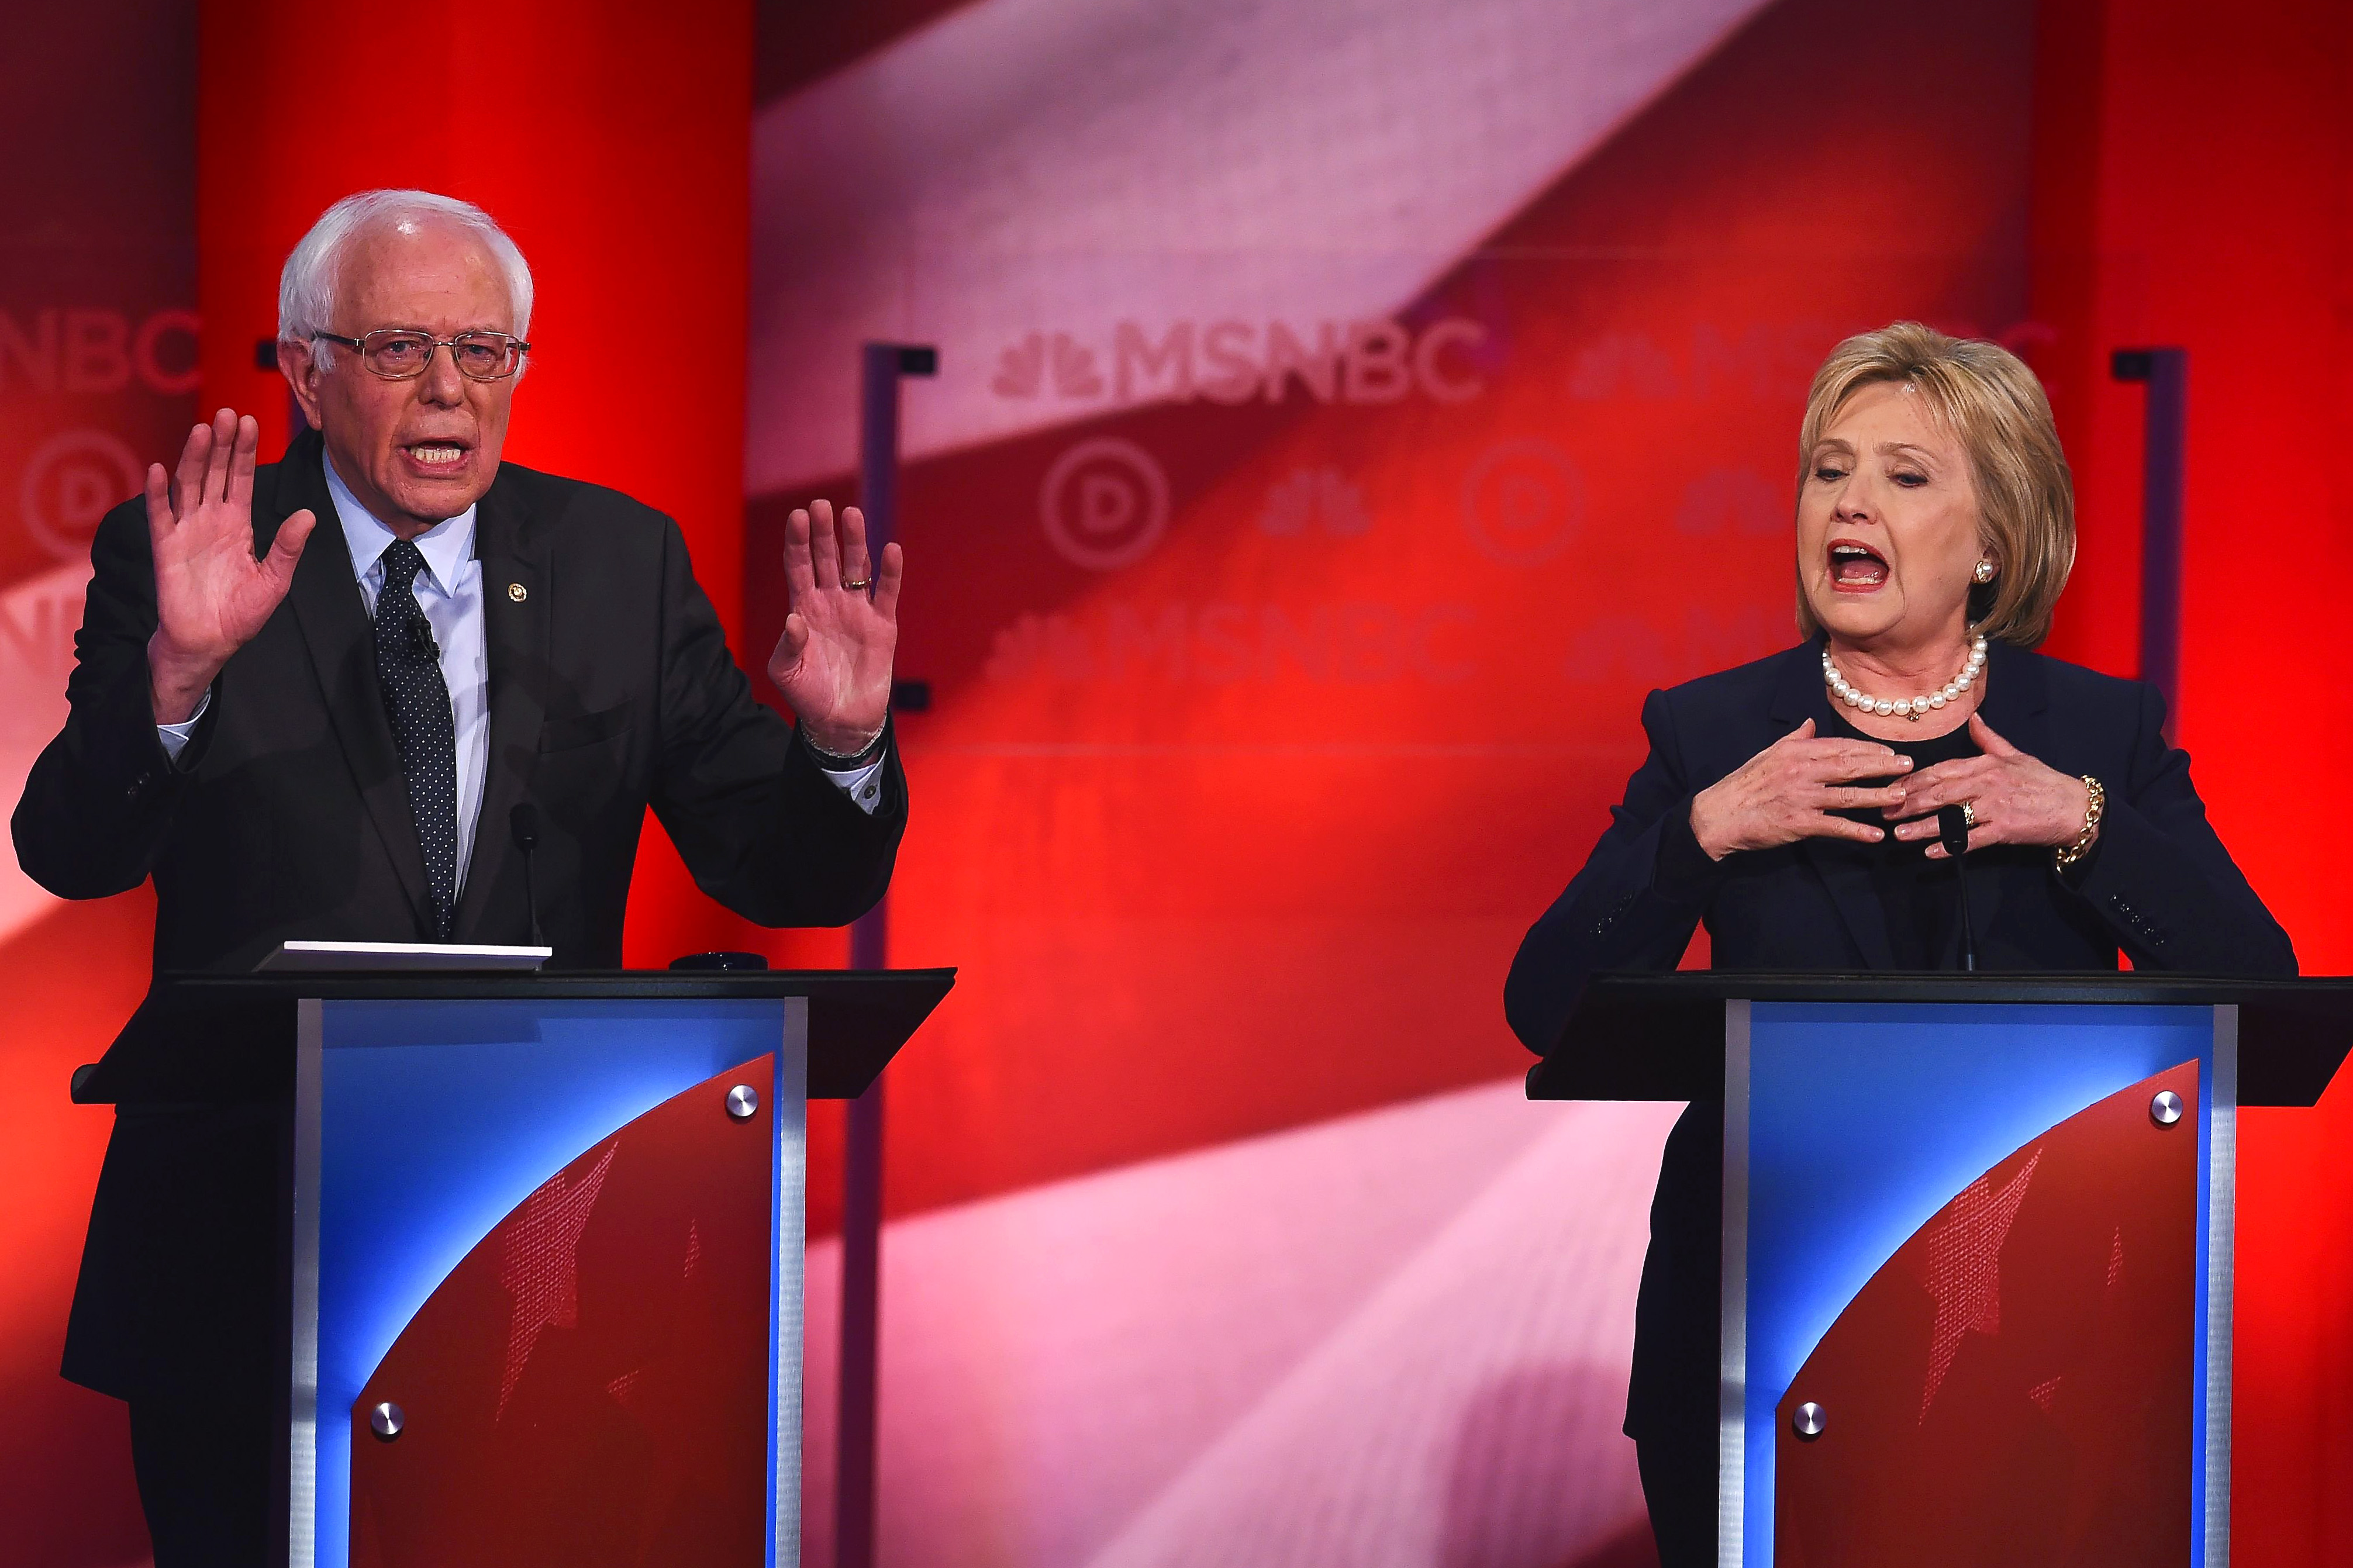 Democratic presidential candidates former Secretary of State Hillary Clinton and U.S. Sen. Bernie Sanders (I-VT) appear at a Democratic debate at the University of New Hampshire on Feb. 4, 2016 in Durham, N.H. (Jewel Samad—AFP/Getty Images)